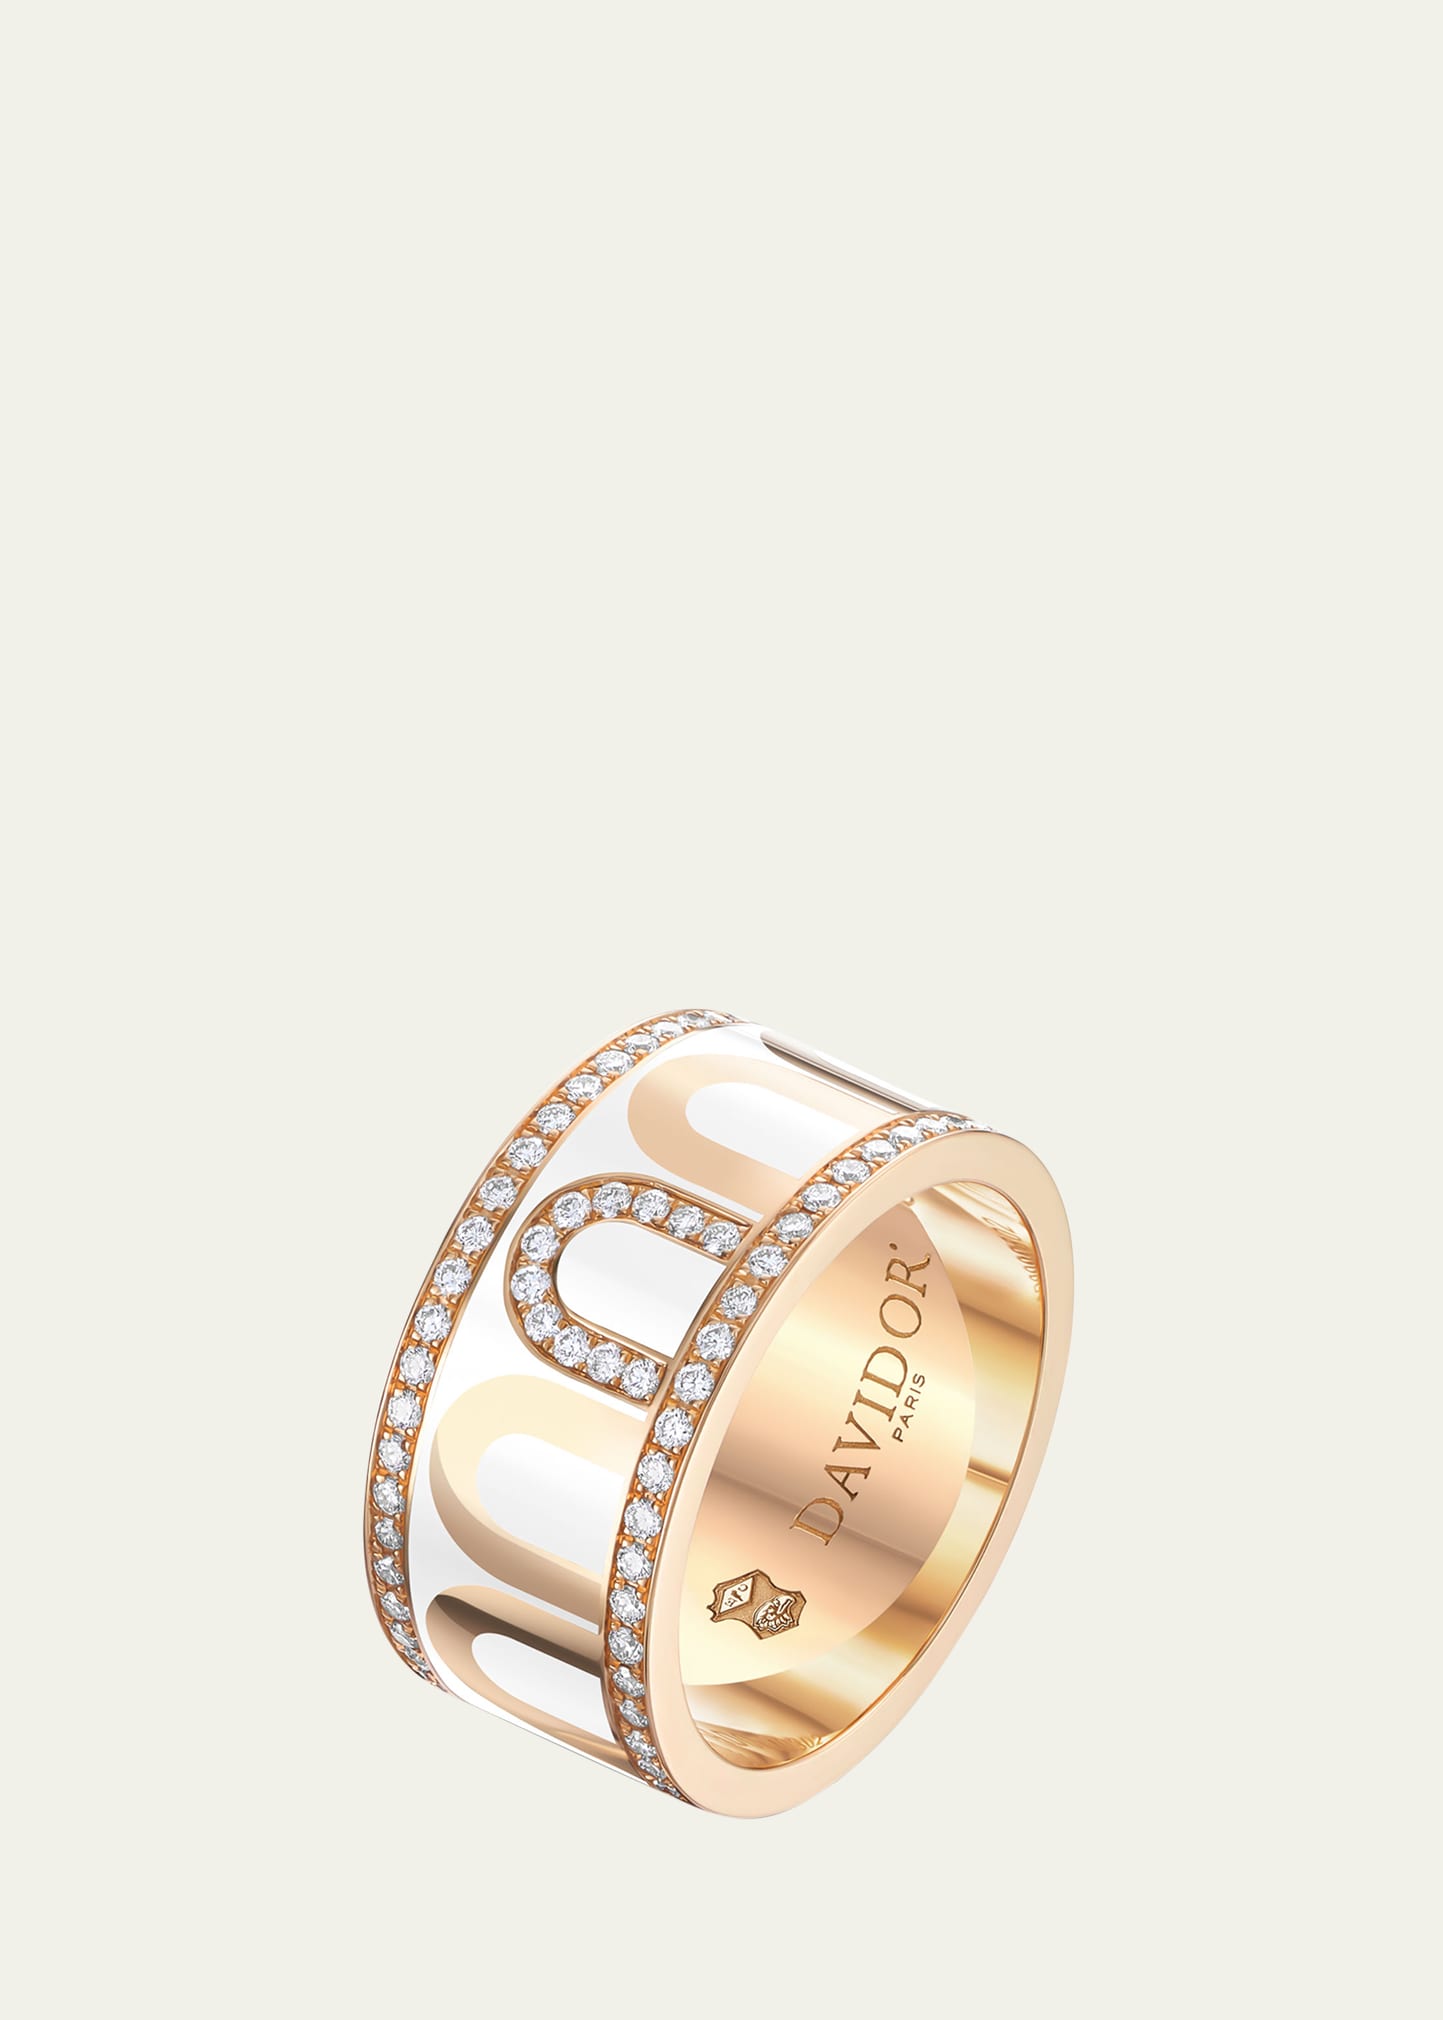 Davidor L'arc De  Ring Gm In 18k Rose Gold With Neige Lacquered Ceramic And Porta Diamonds